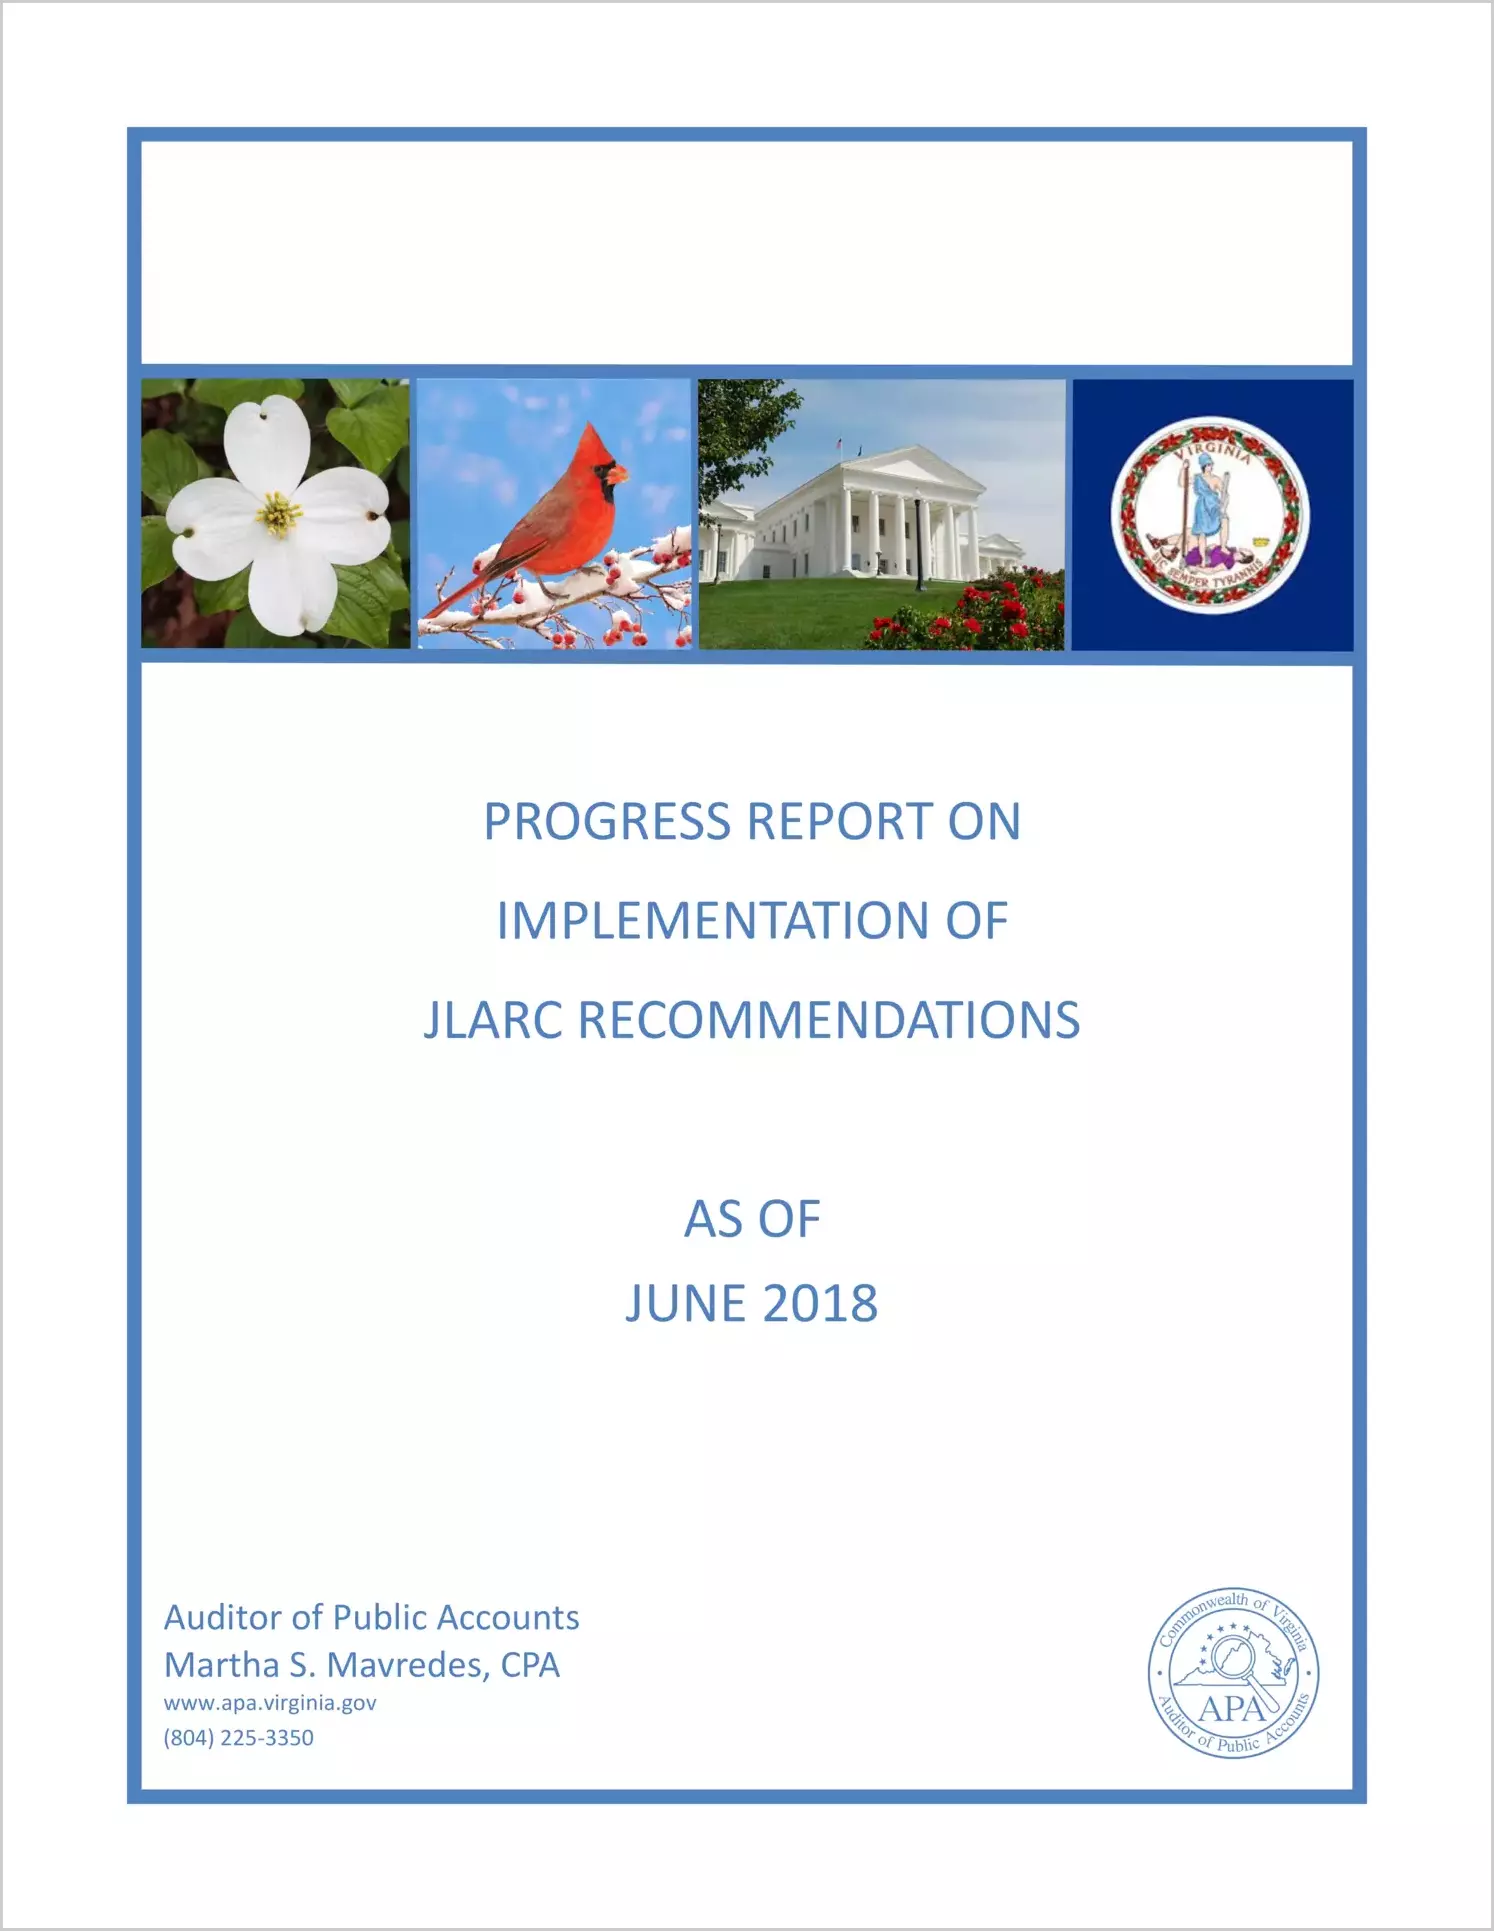 Progress Report on Implementation of JLARC Recommendations as of June 2018